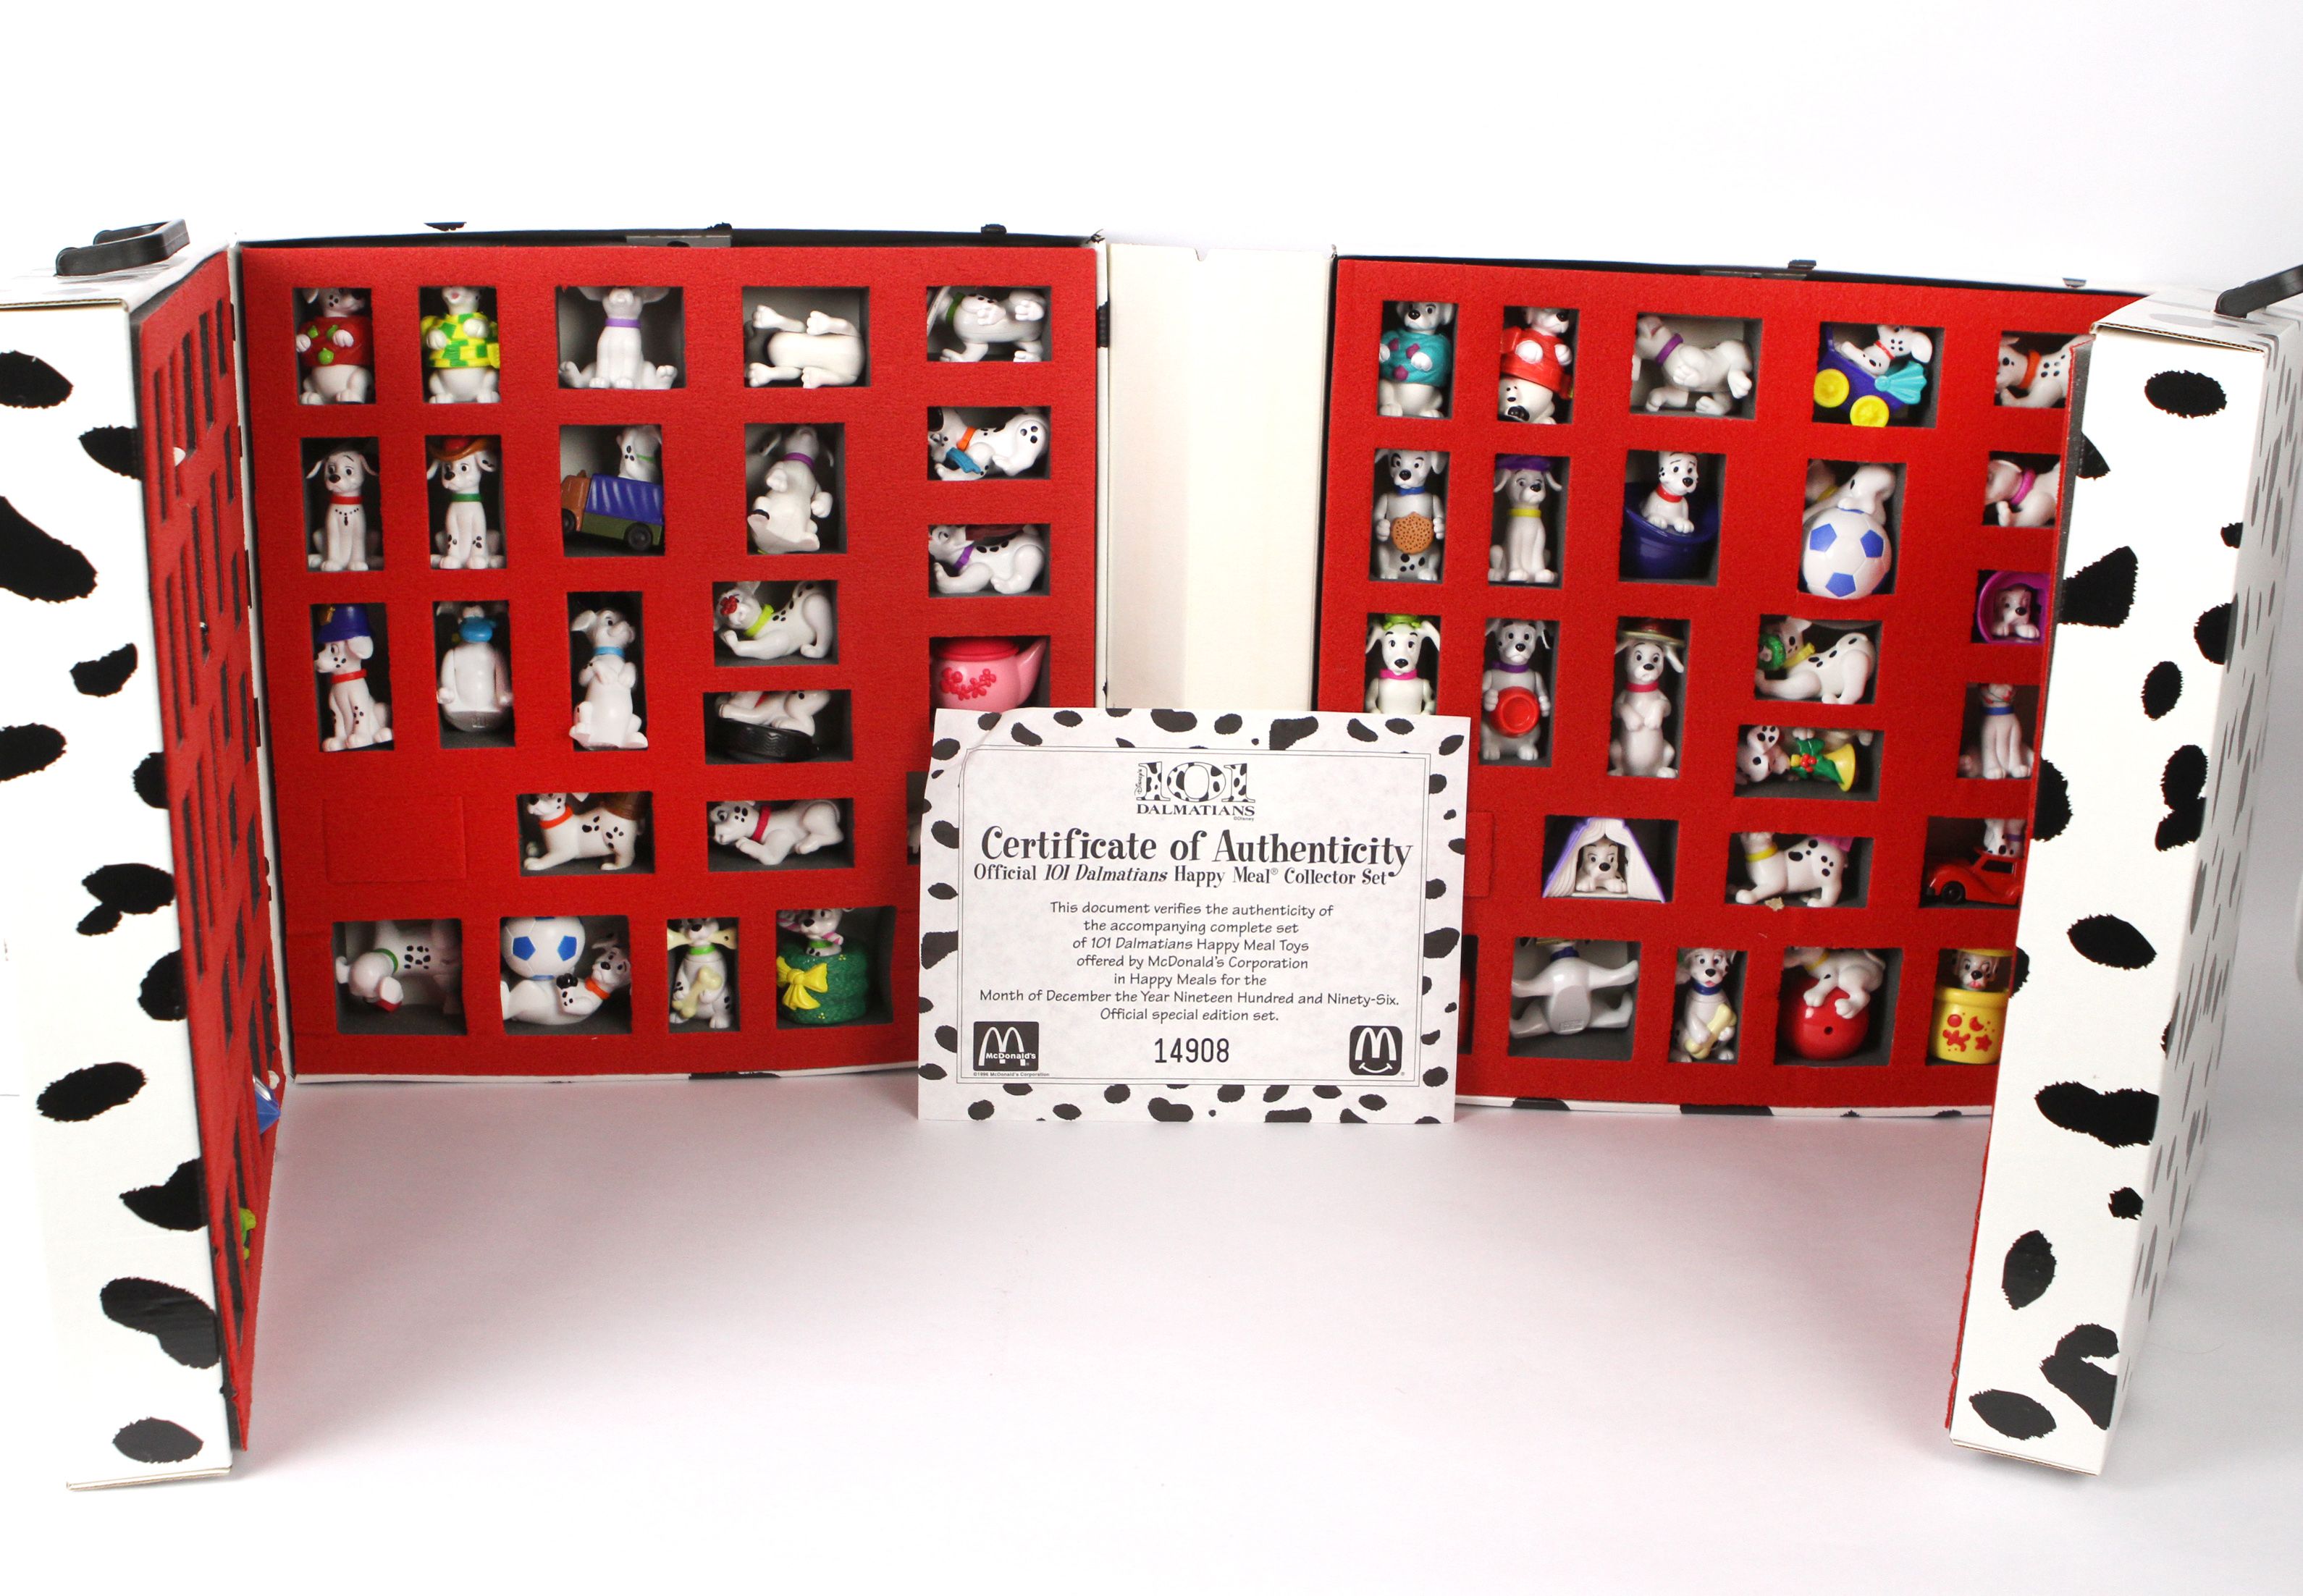 Details about   Mc DONALDS OFFICIAL 101 DALMATIANS HAPPY MEAL COLLECTOR SET in CASE 